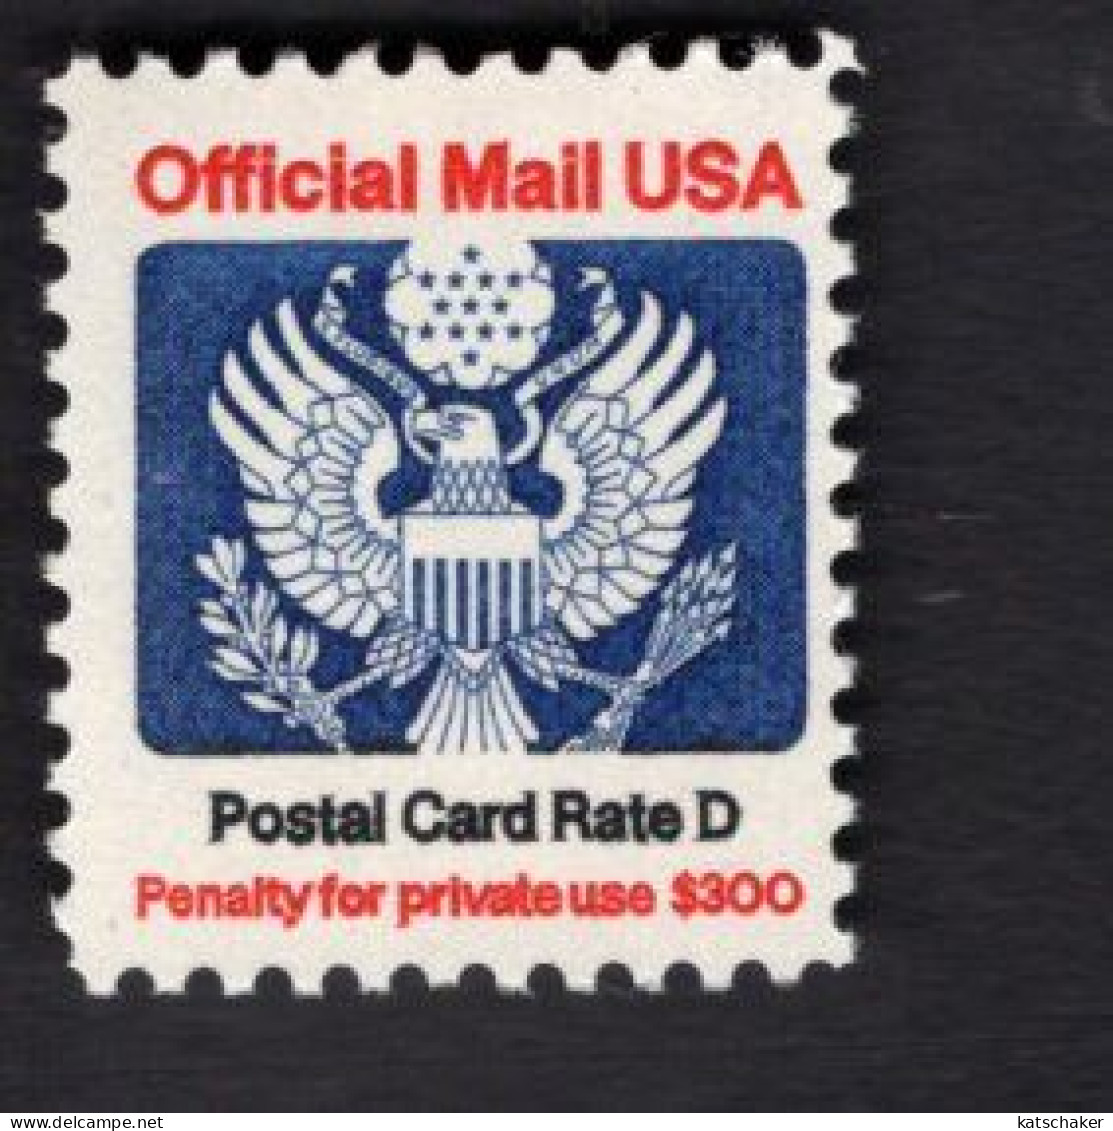 2008963964 1985 (XX) SCOTT O138 POSTFRIS MINT NEVER HINGED Eagle And Shield OFFICIAL MAIL -  POSTAL CARD RATE D - Dienstmarken